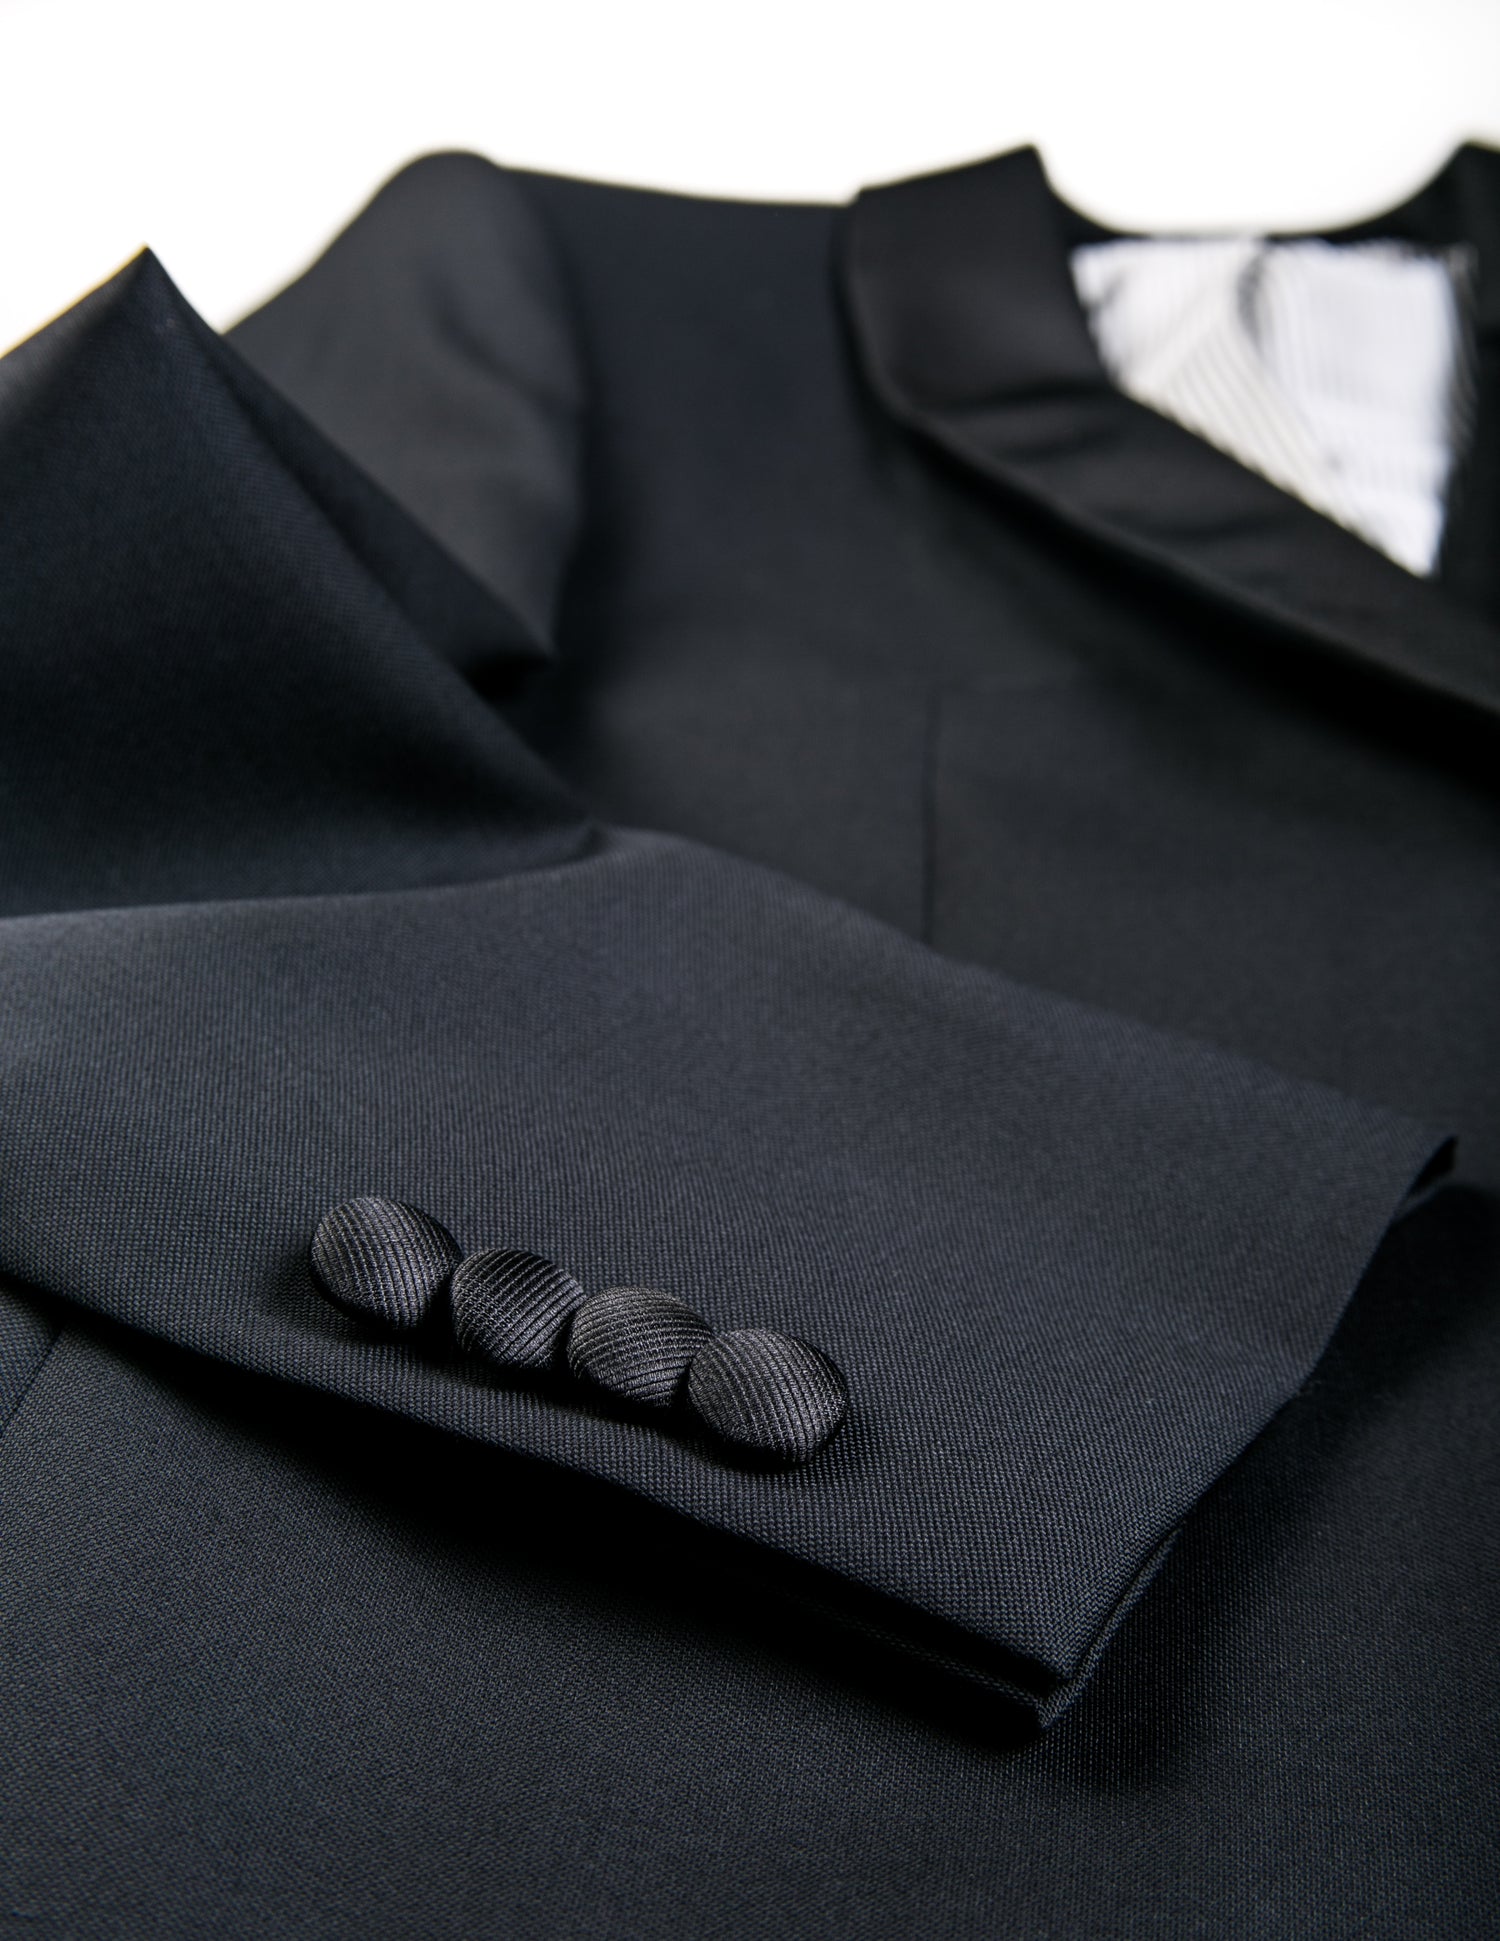 Detail shot of Brooklyn Tailors BKT50 Shawl Collar Tuxedo Jacket in Super 110s - Black with Grosgrain Lapel showing sleeve, covered buttons, and fabric texture